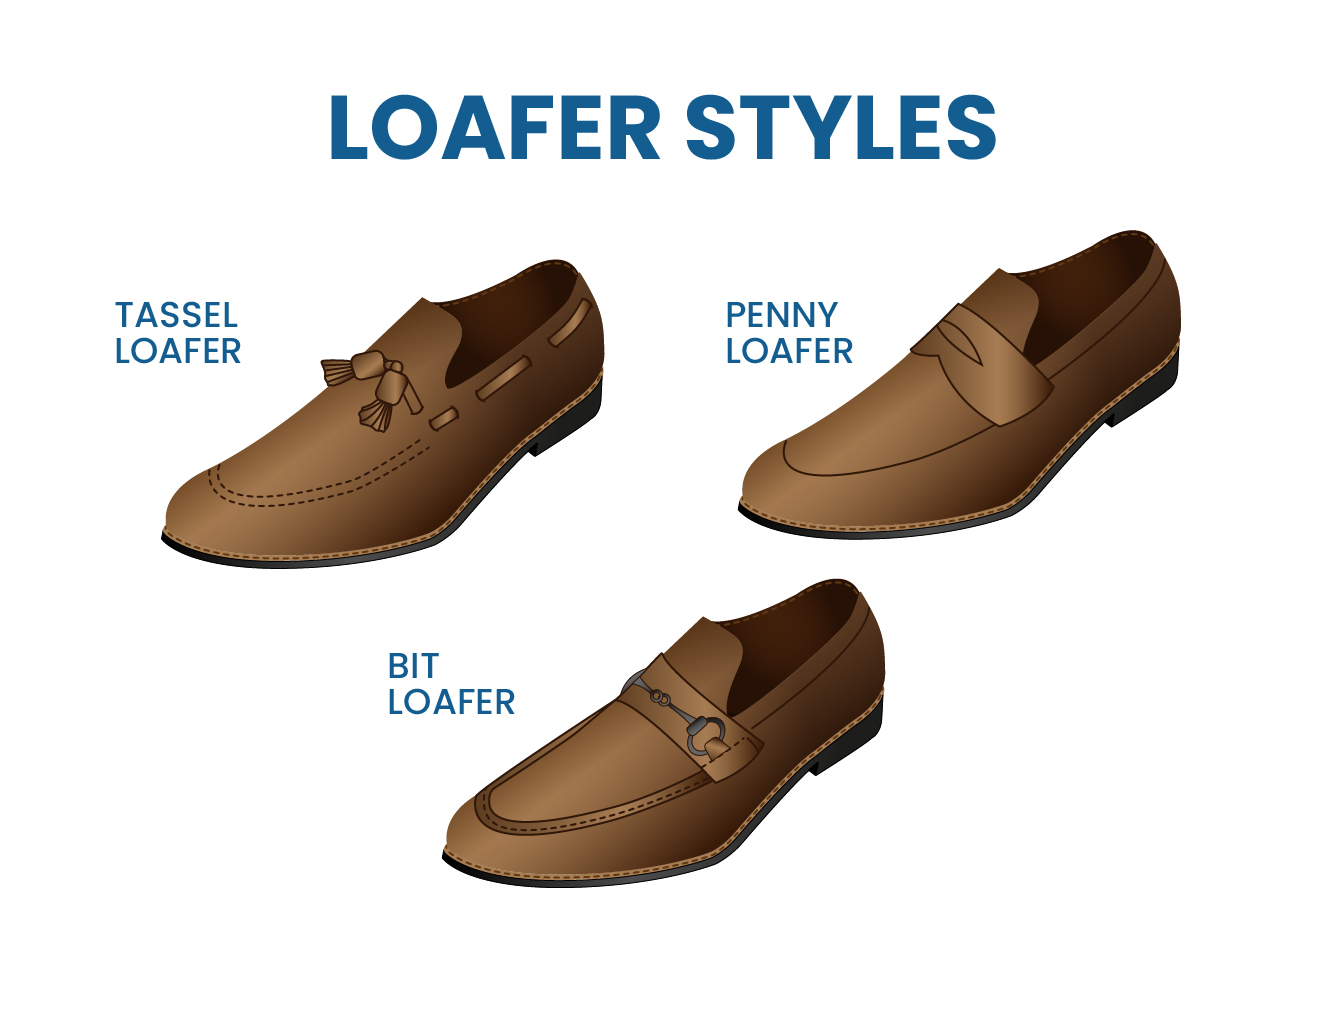 Stylish u0026 Simple Ways to Wear Loafers with a Suit - Suits Expert